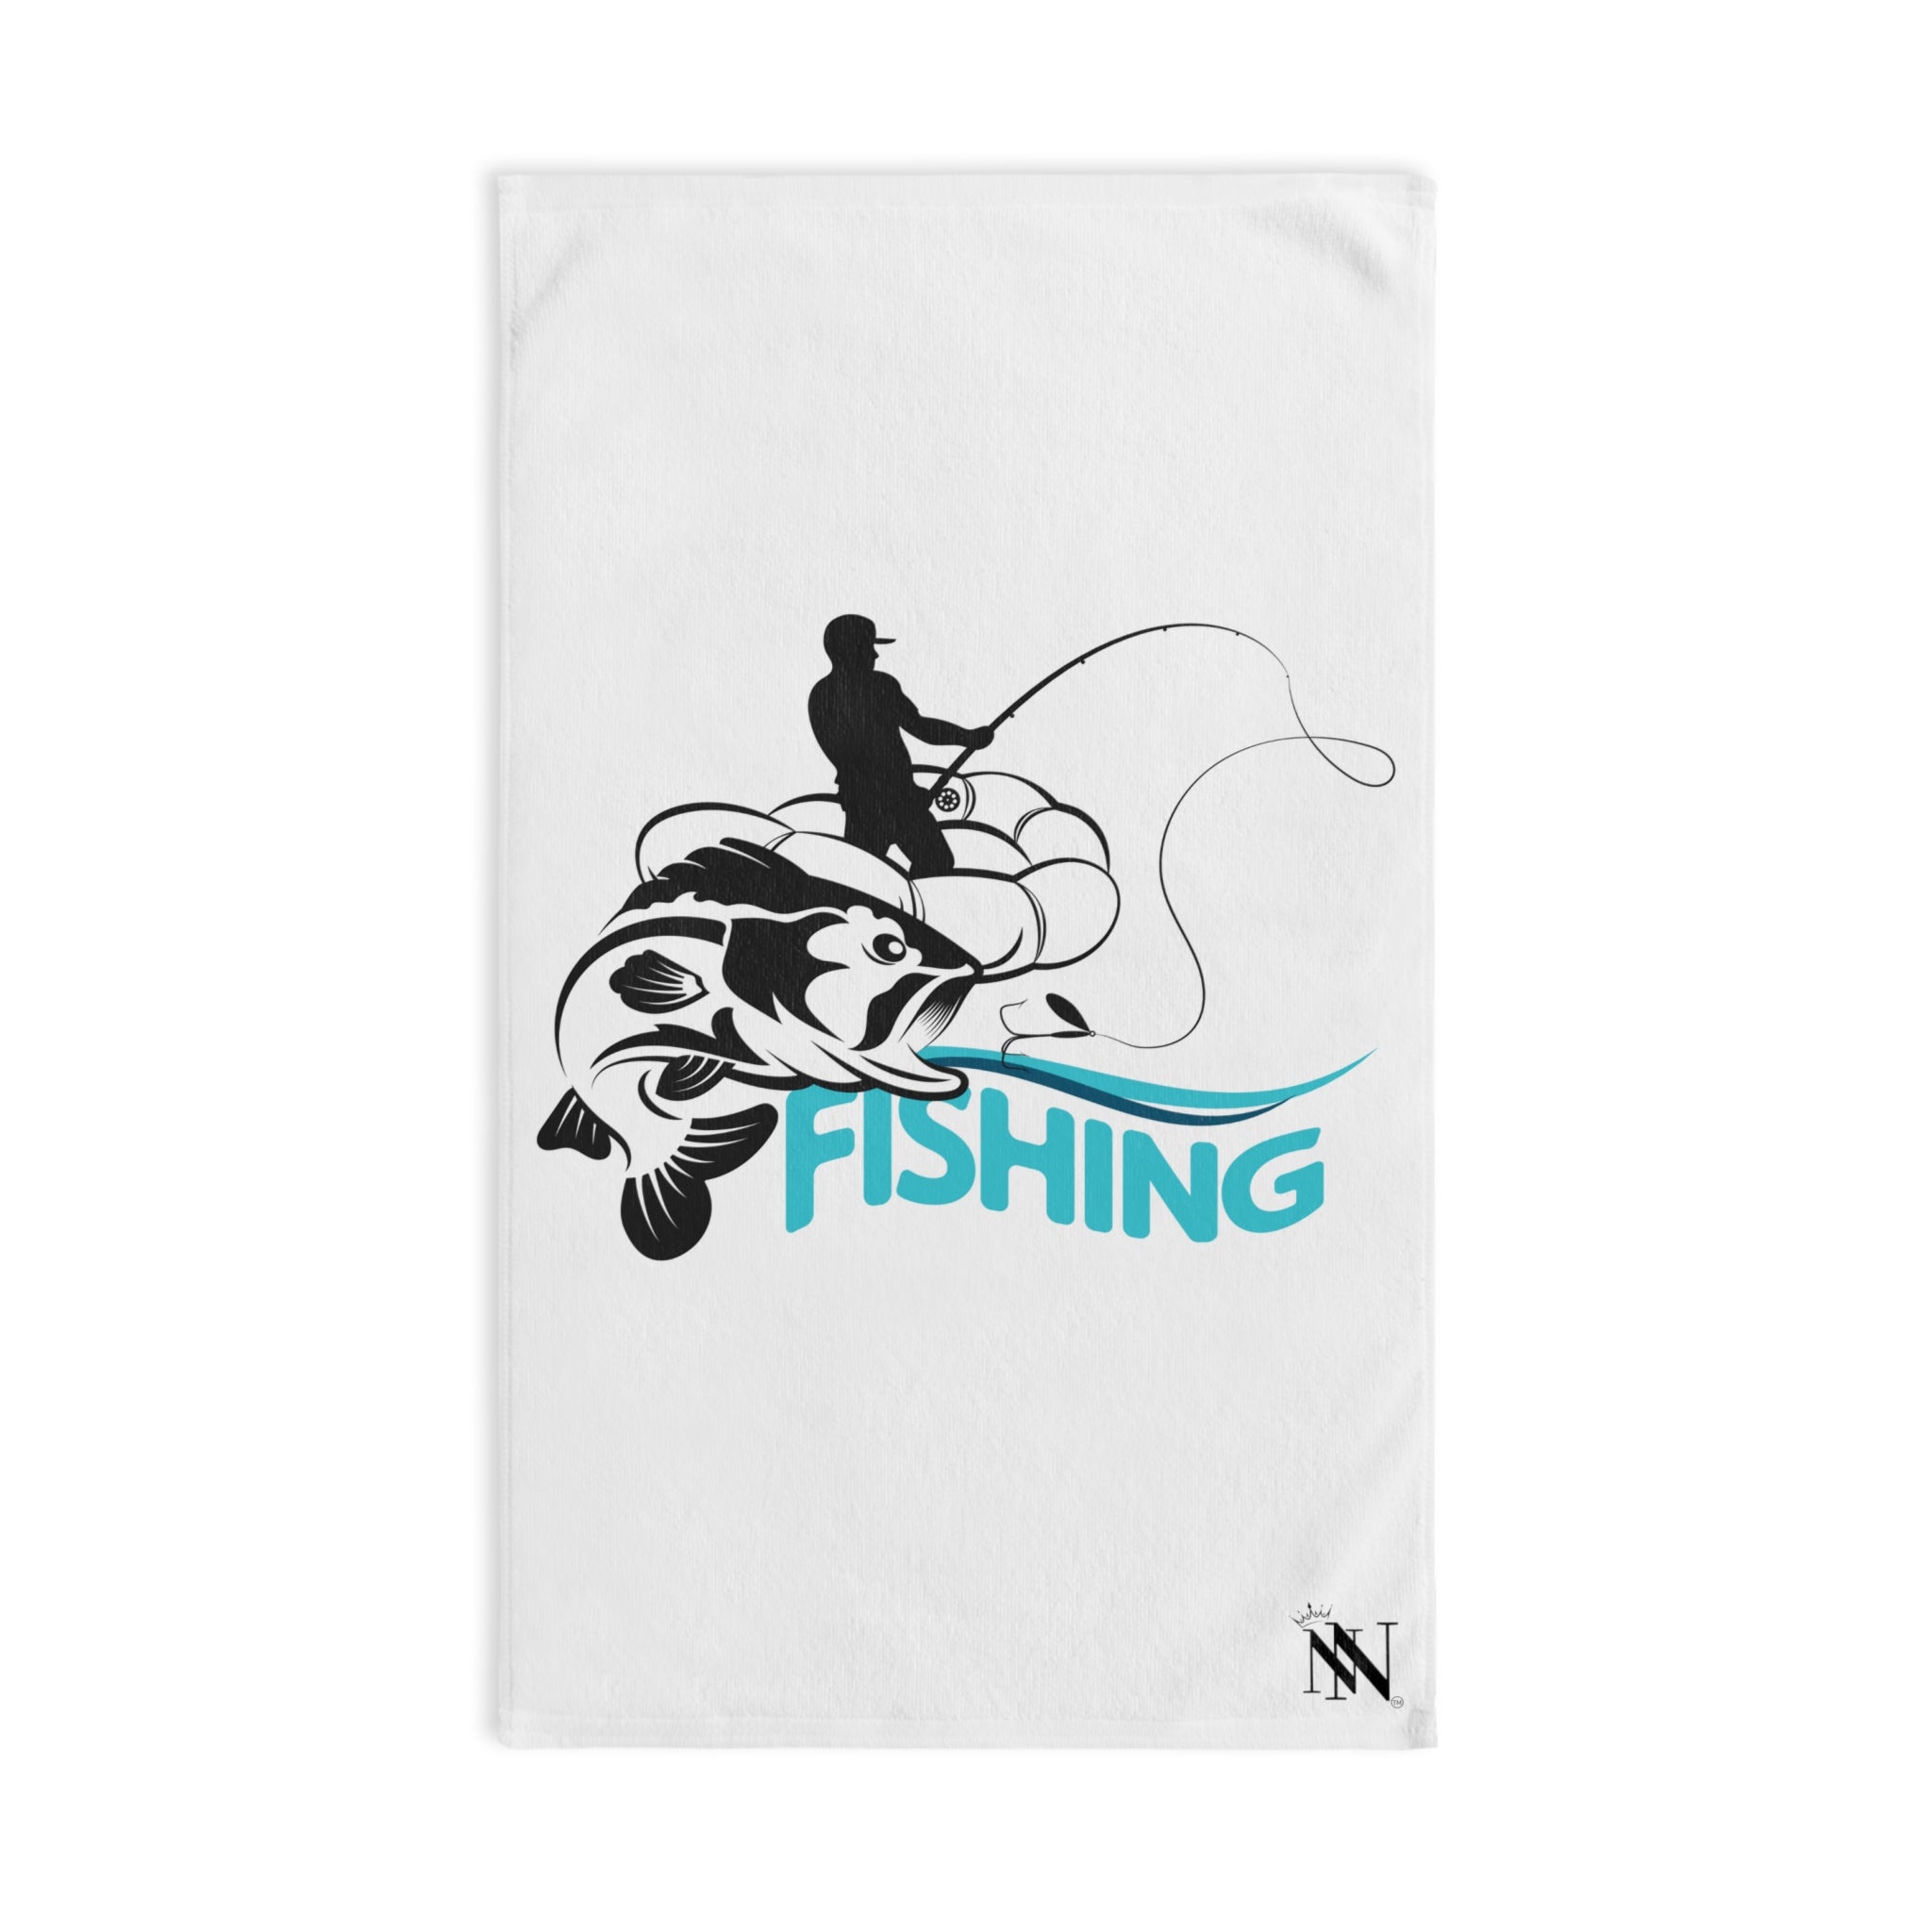 Fisherman in Boat White | Funny Gifts for Men - Gifts for Him - Birthday Gifts for Men, Him, Her, Husband, Boyfriend, Girlfriend, New Couple Gifts, Fathers & Valentines Day Gifts, Christmas Gifts NECTAR NAPKINS